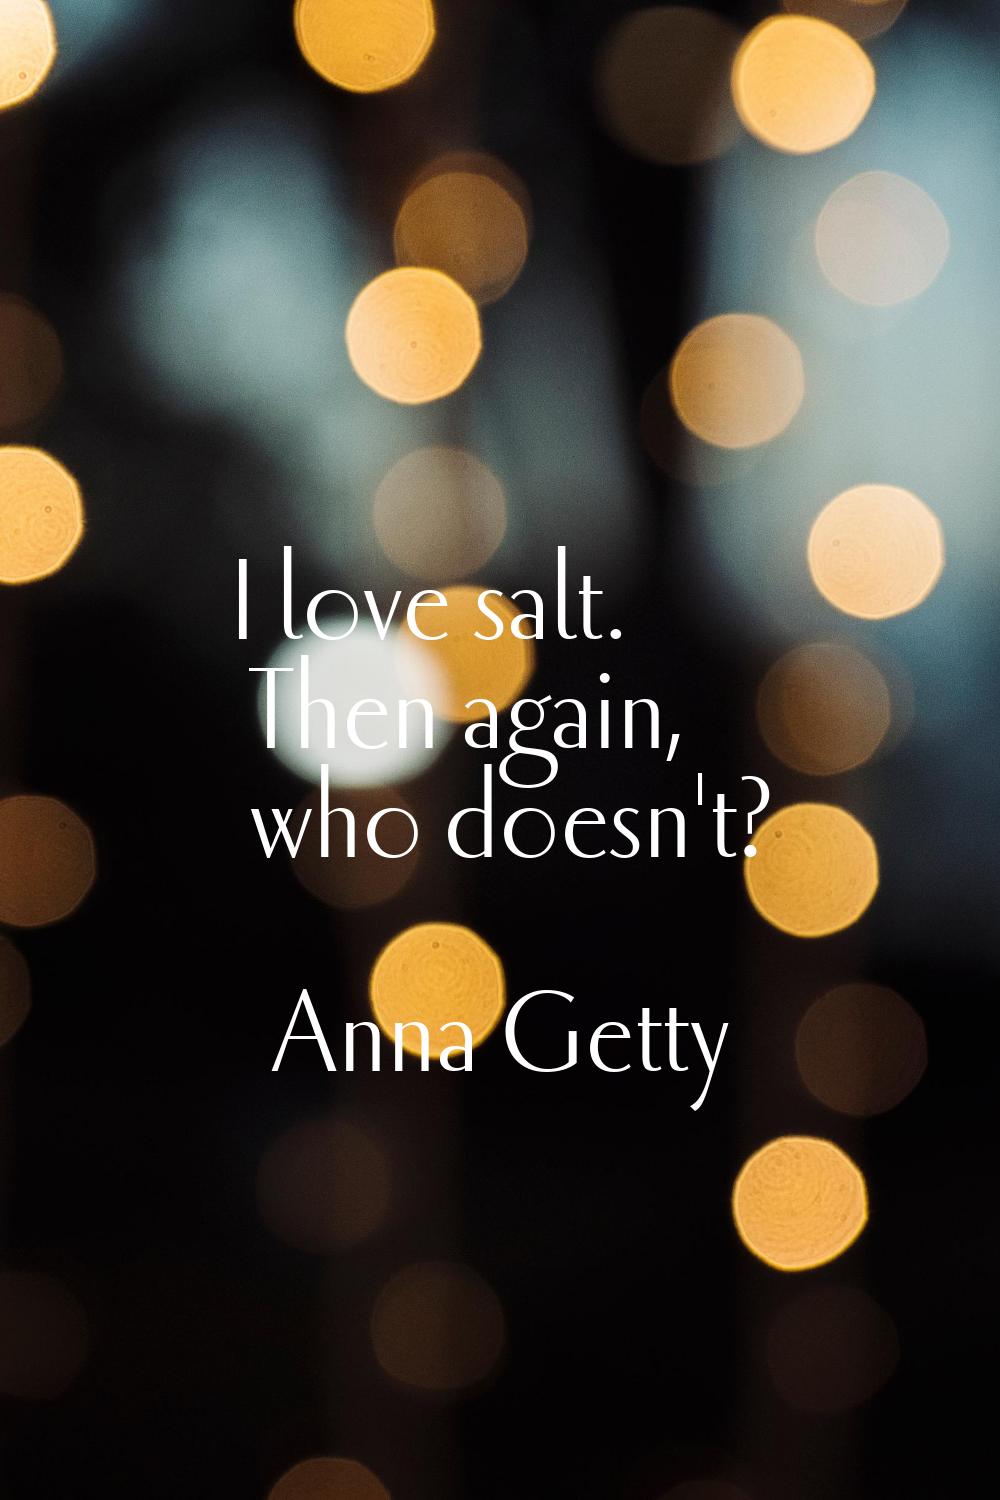 I love salt. Then again, who doesn't?